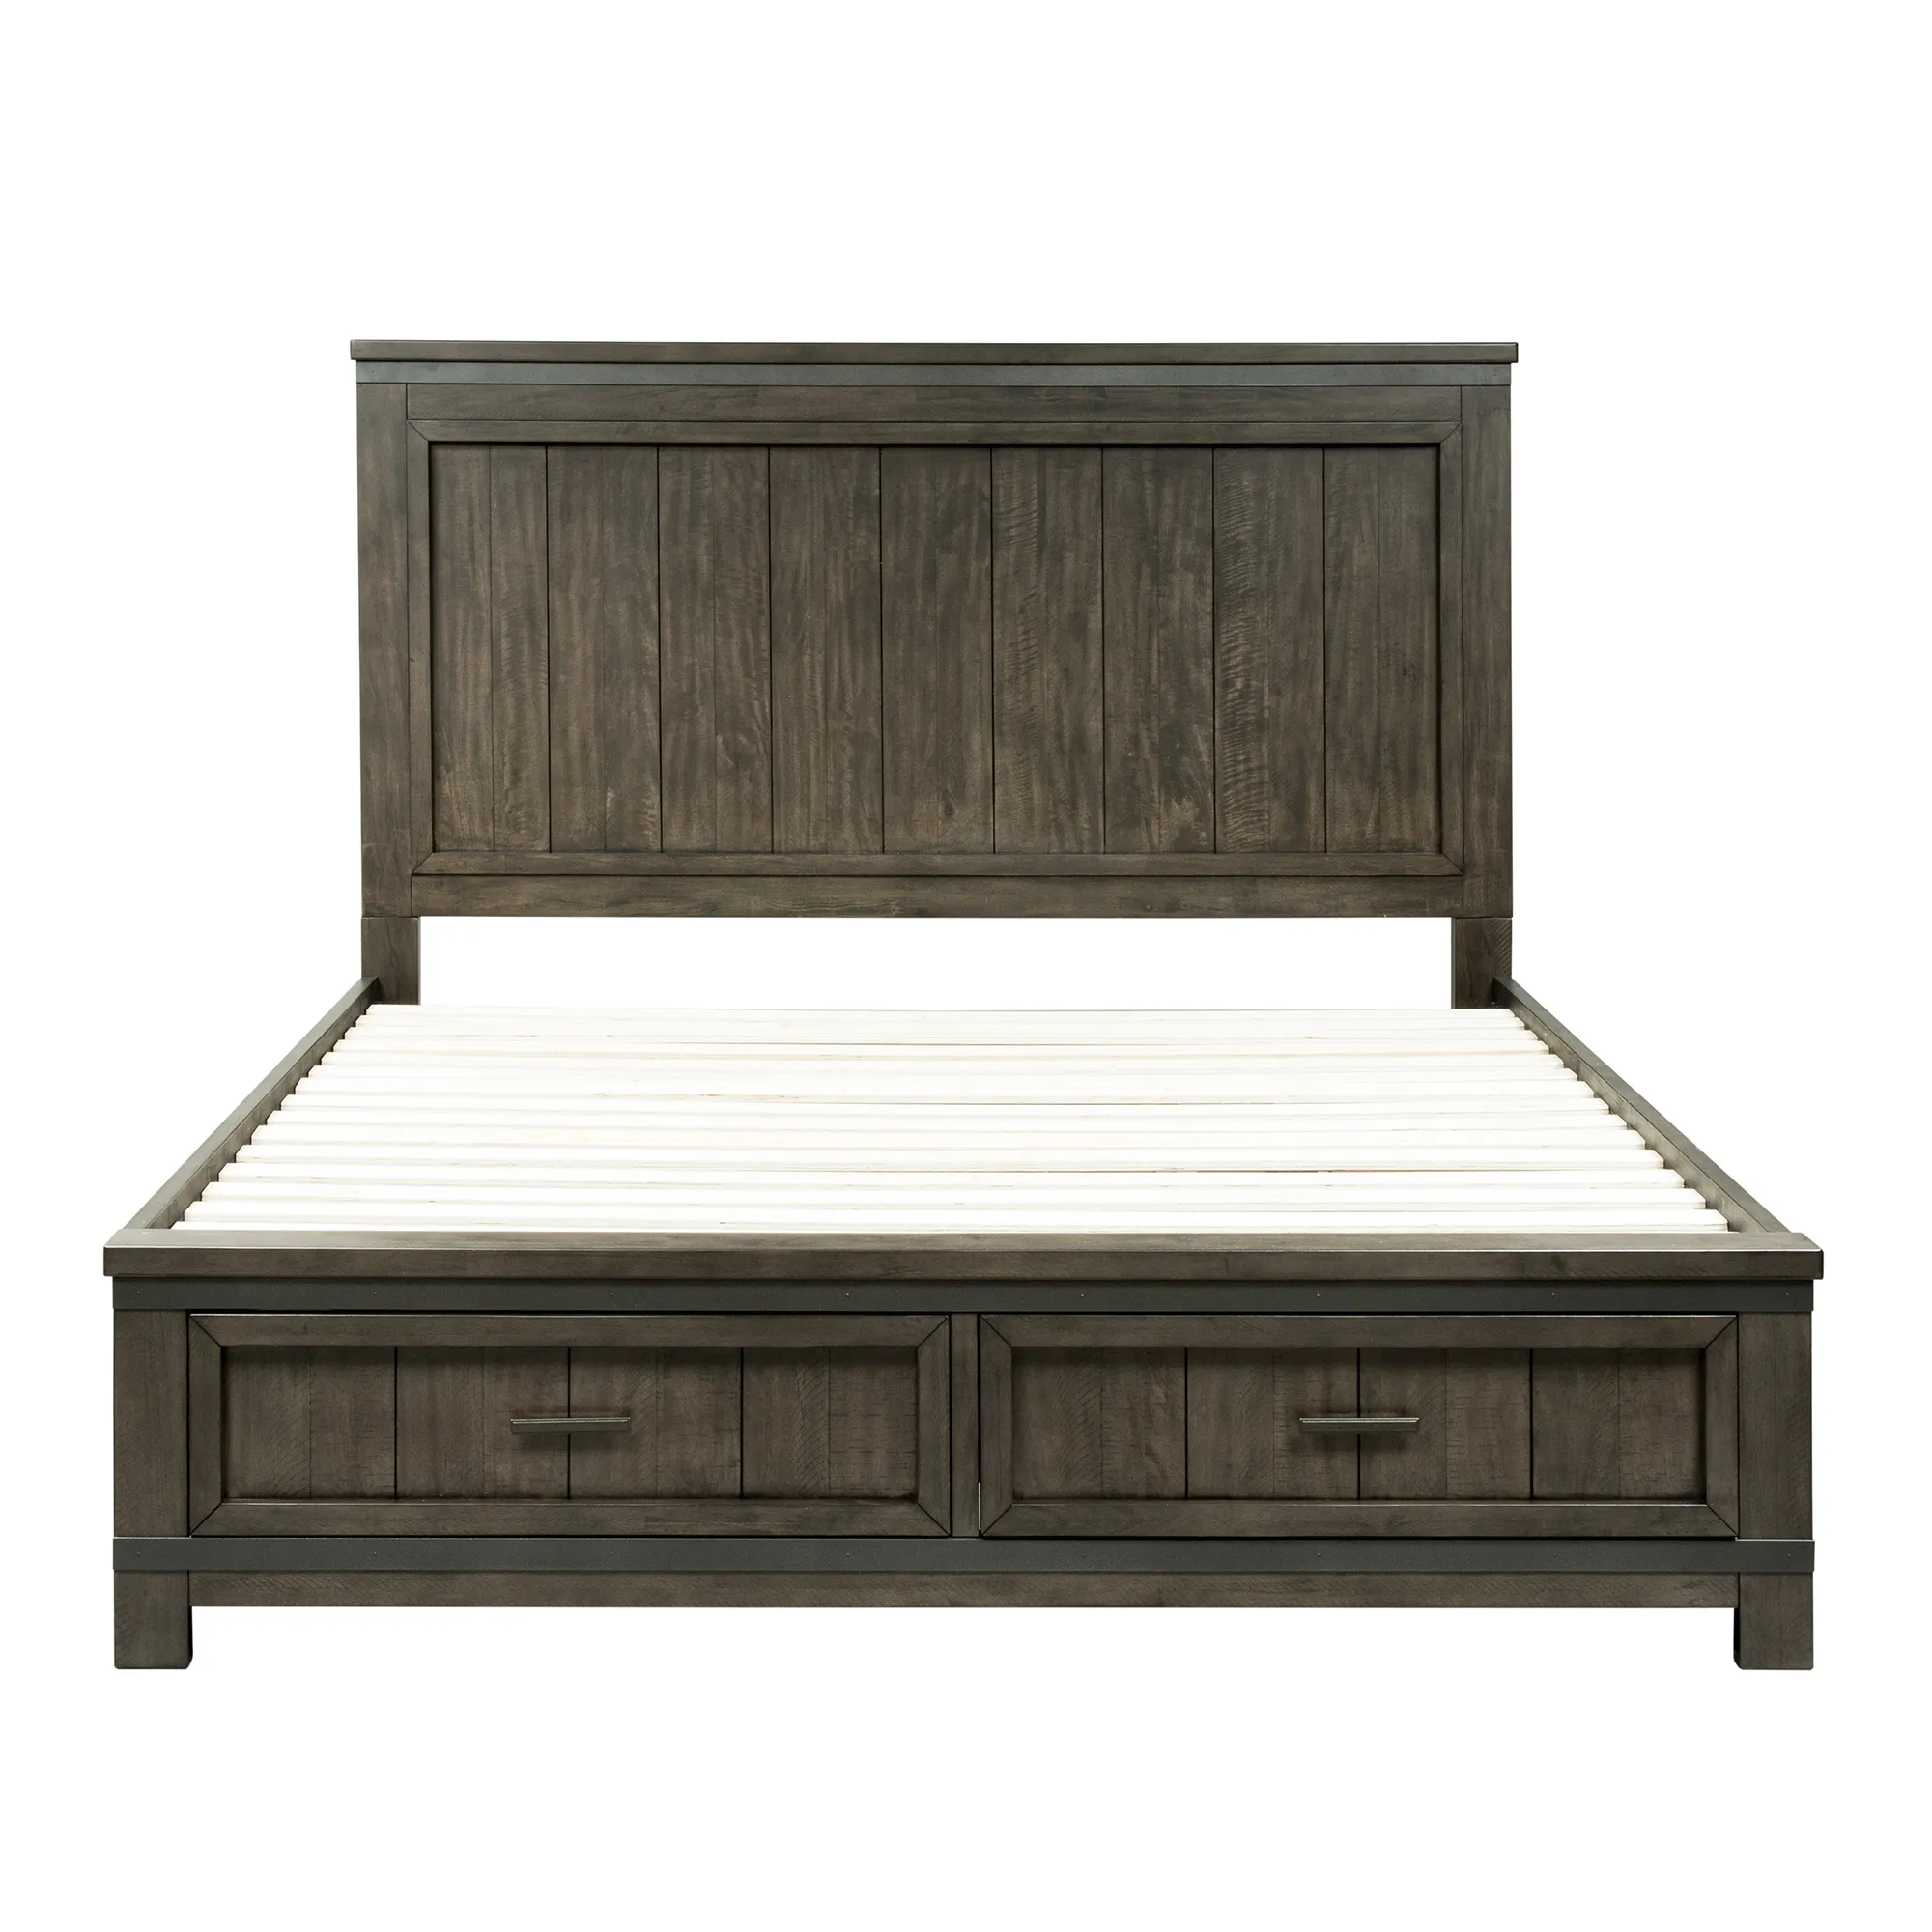 KING TWO SIDED STORAGE BED DRESSER & MIRROR NIGHT STAND - THORNWOOD HILLS